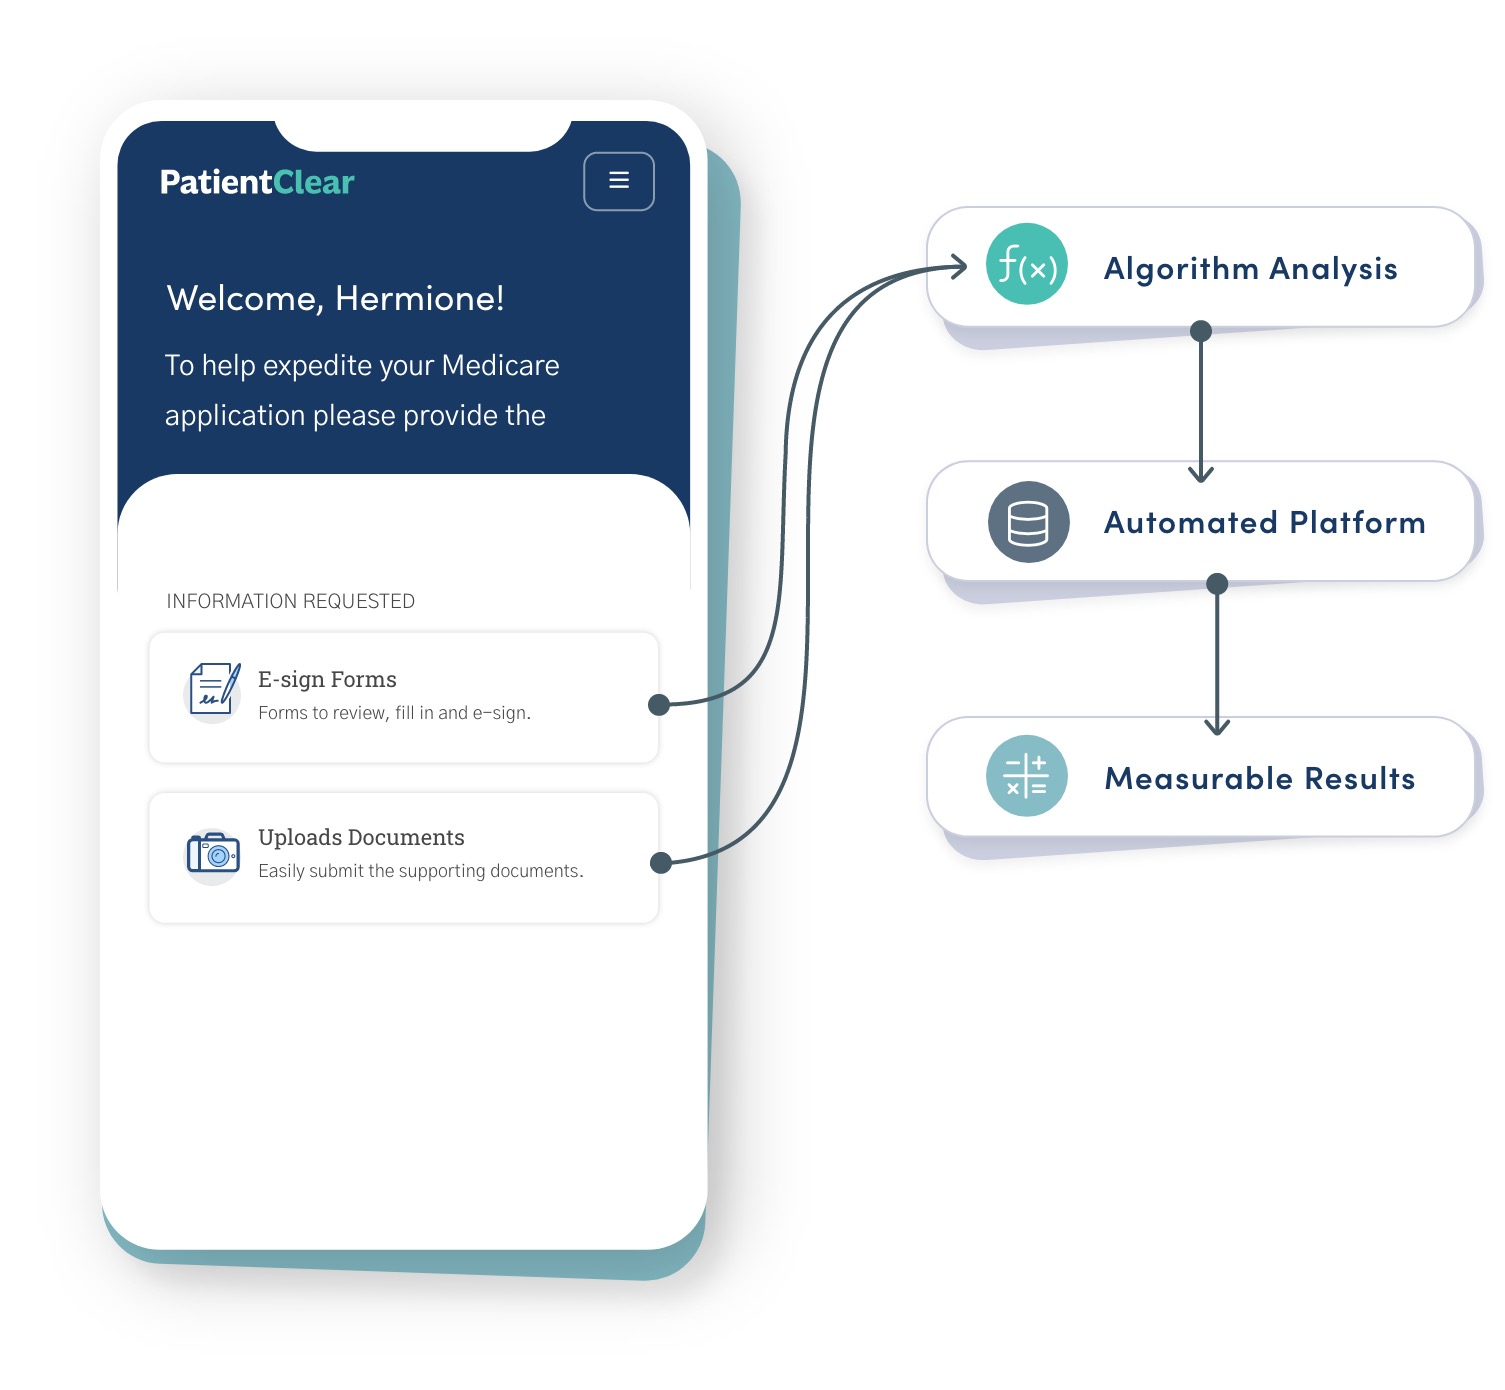 Infographic screenshot of Patient Clear branded consumer portal with E-sign Forms and Upload Documents arrows pointing to Data Aggregation, Algorithm Analysis and Machine Learning AI